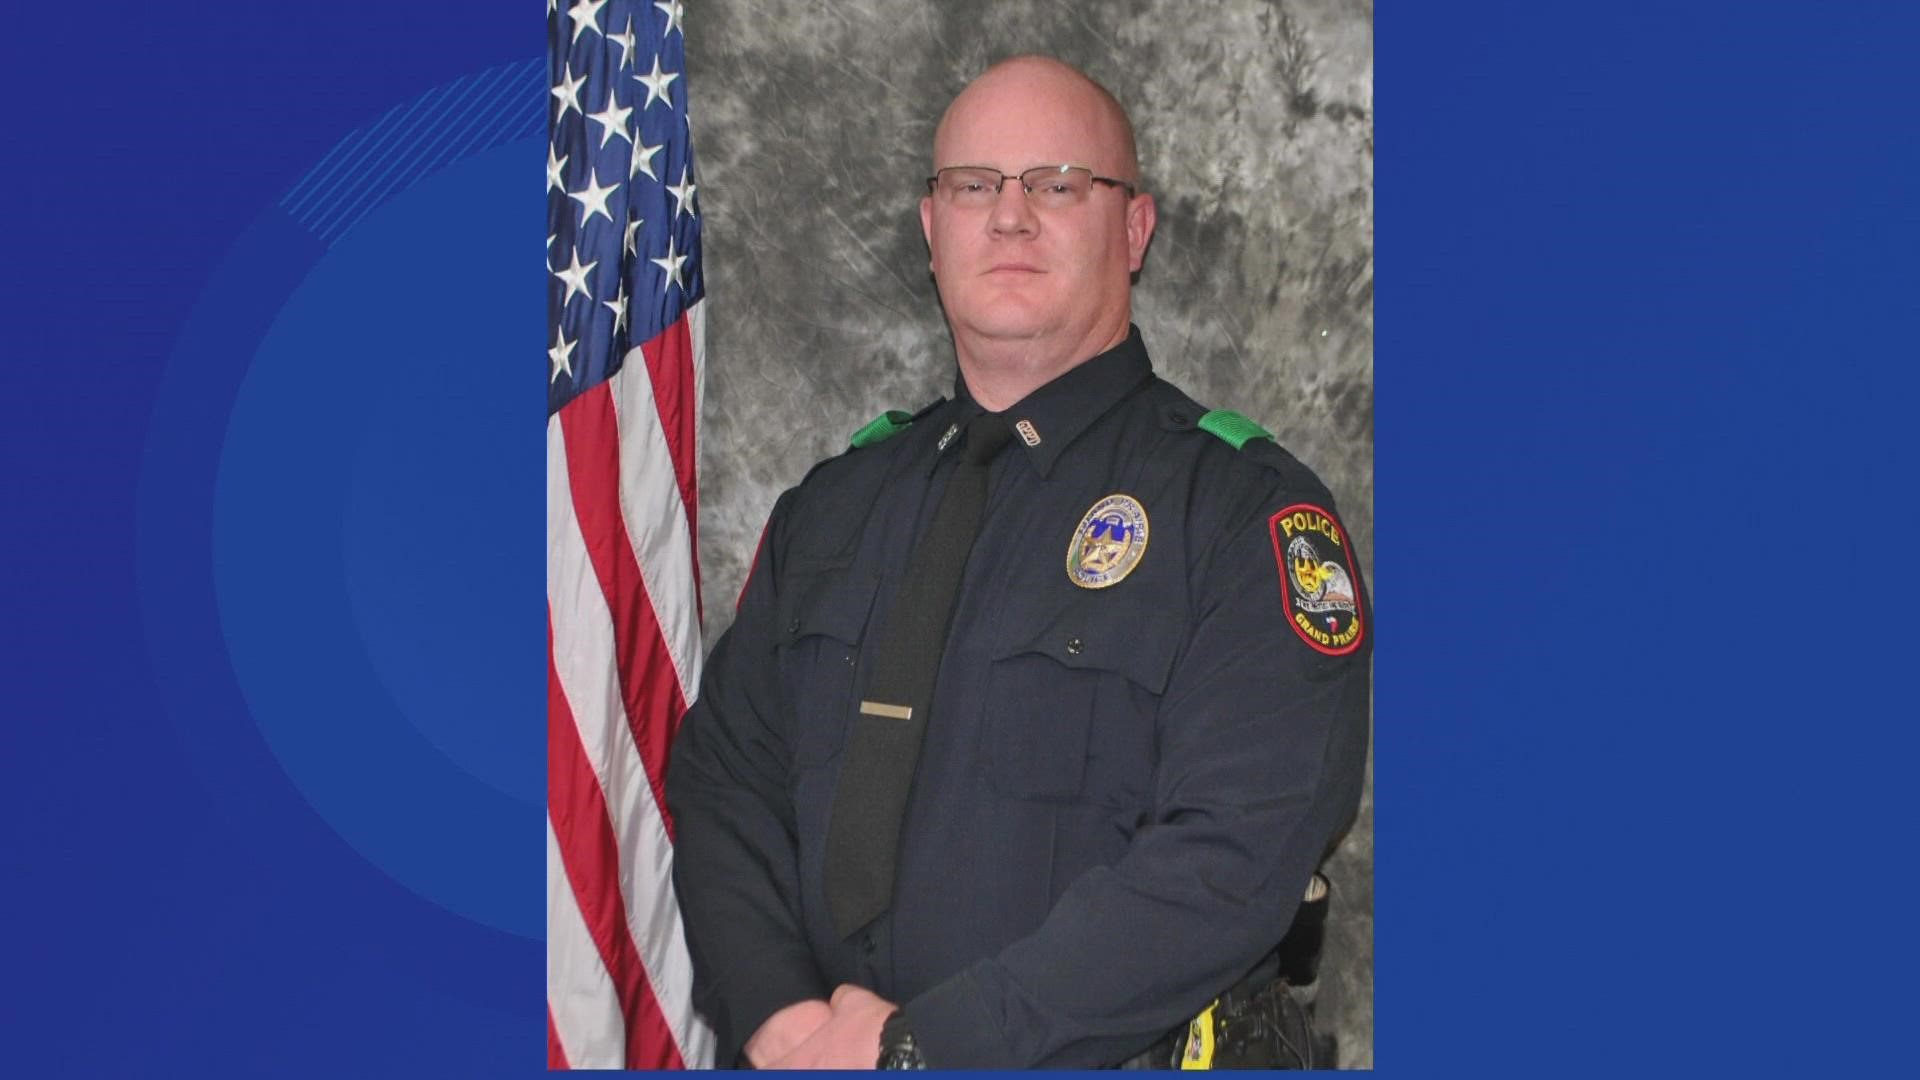 The Grand Prairie Police Department said officer Andy MacDonald died Monday morning.